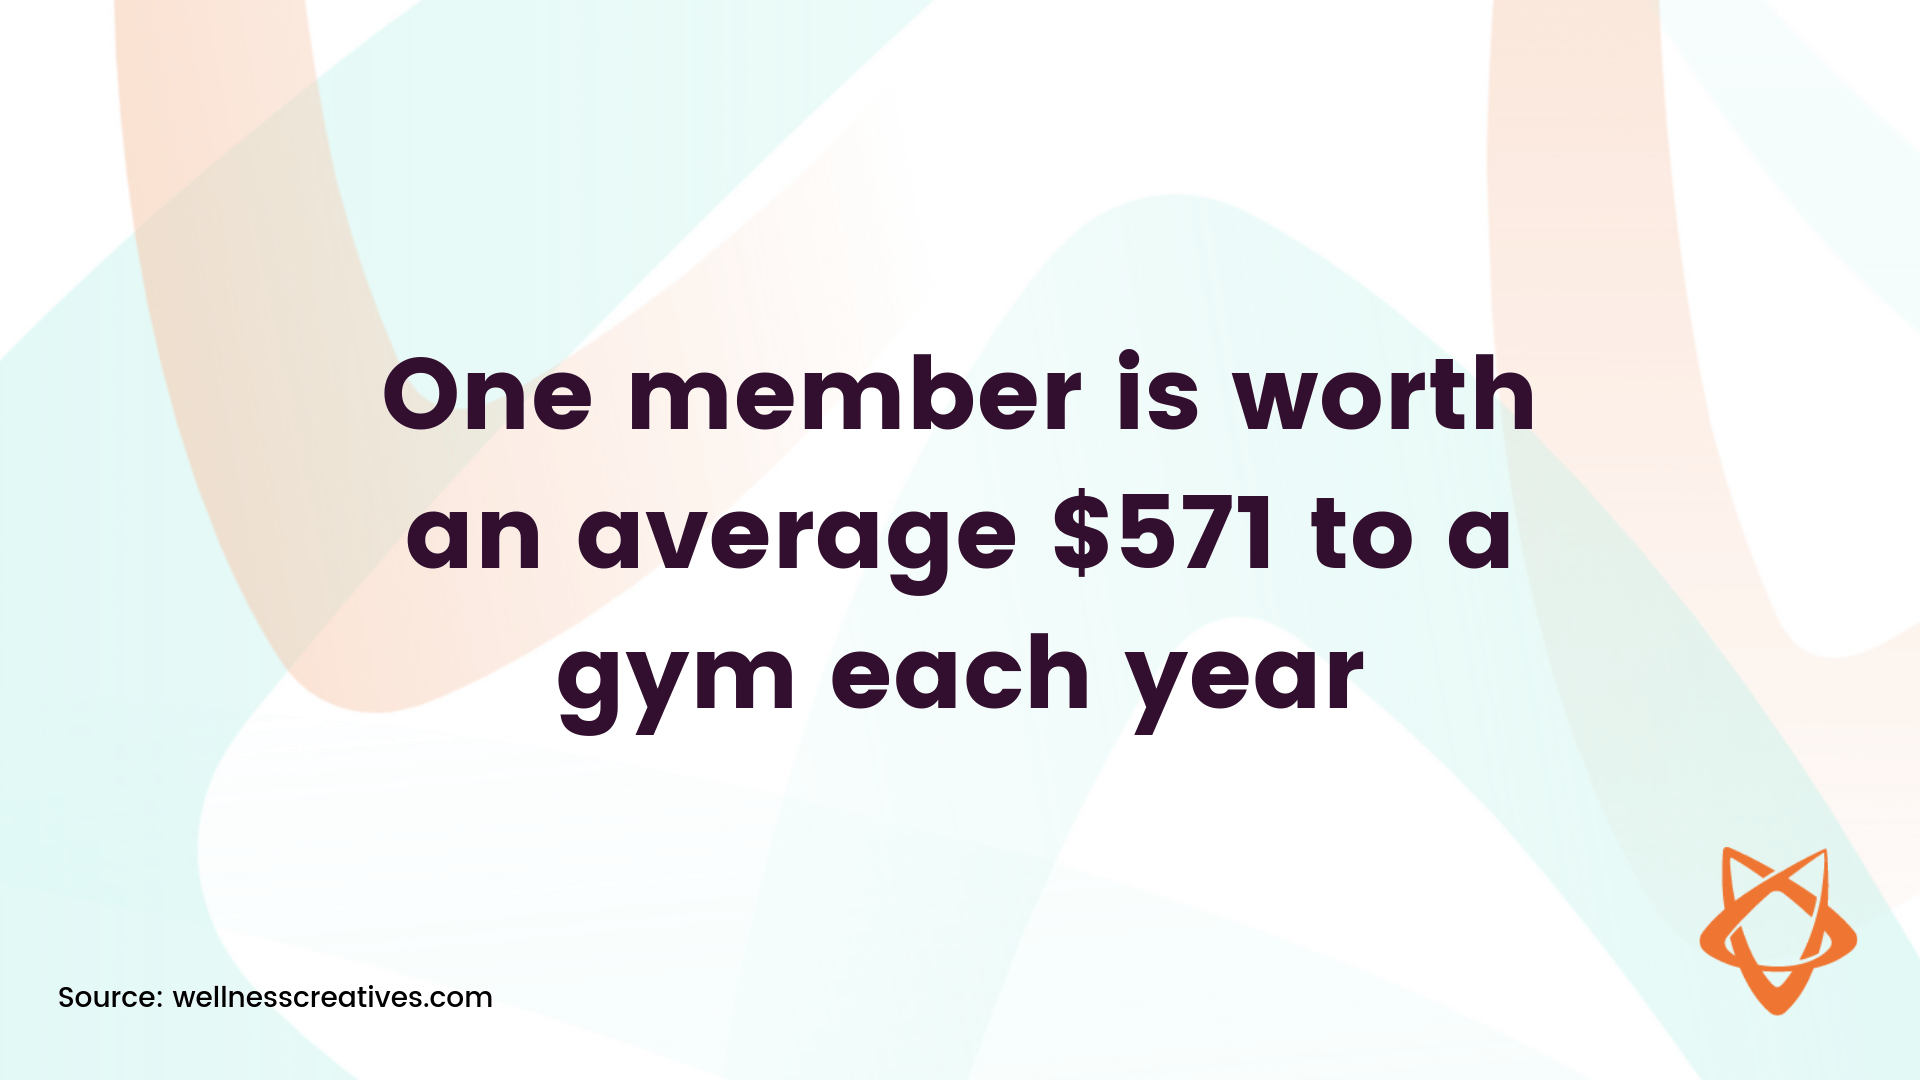 stat showing that one member is worth an average $571 to a gym each year